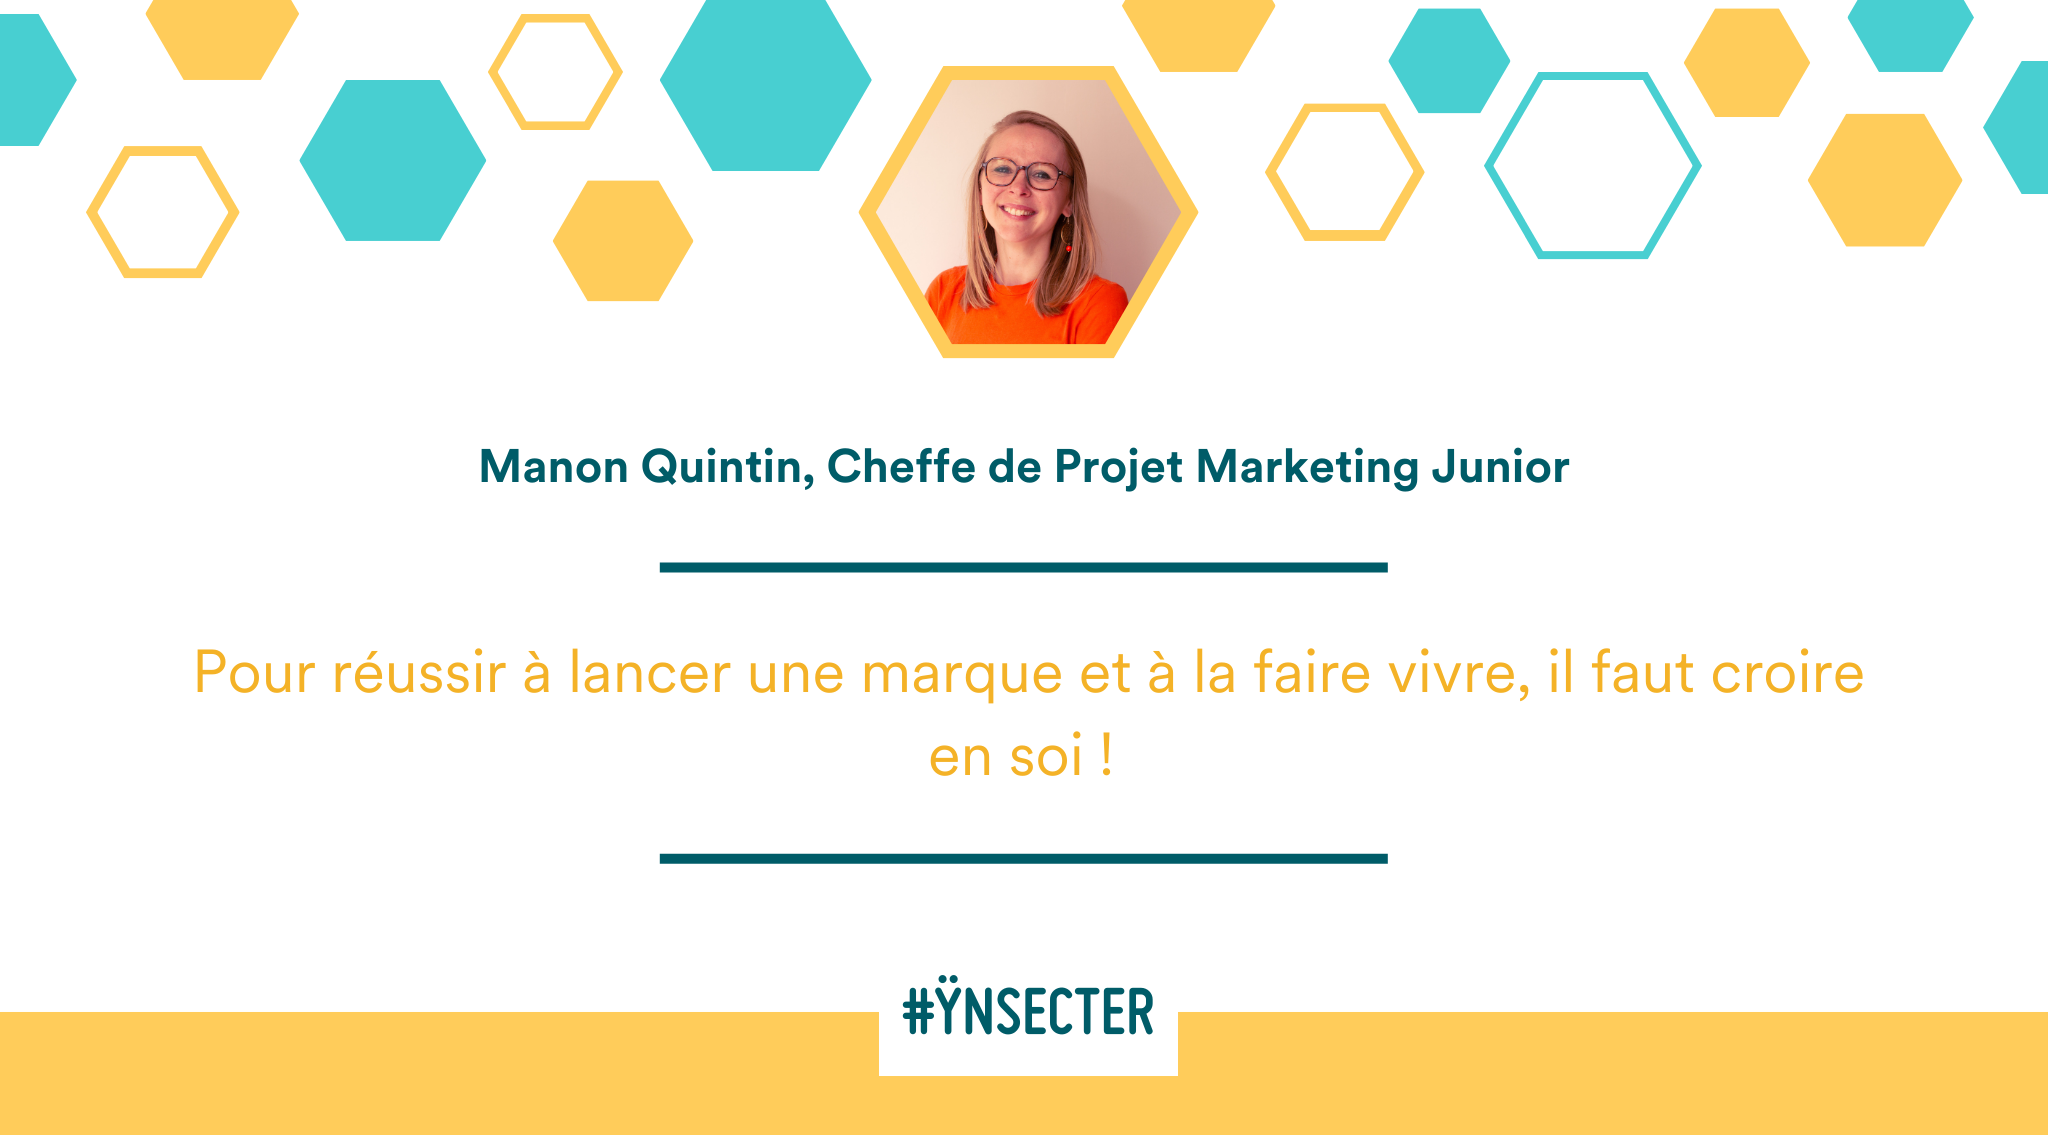 #Ynsecter Manon Quintin